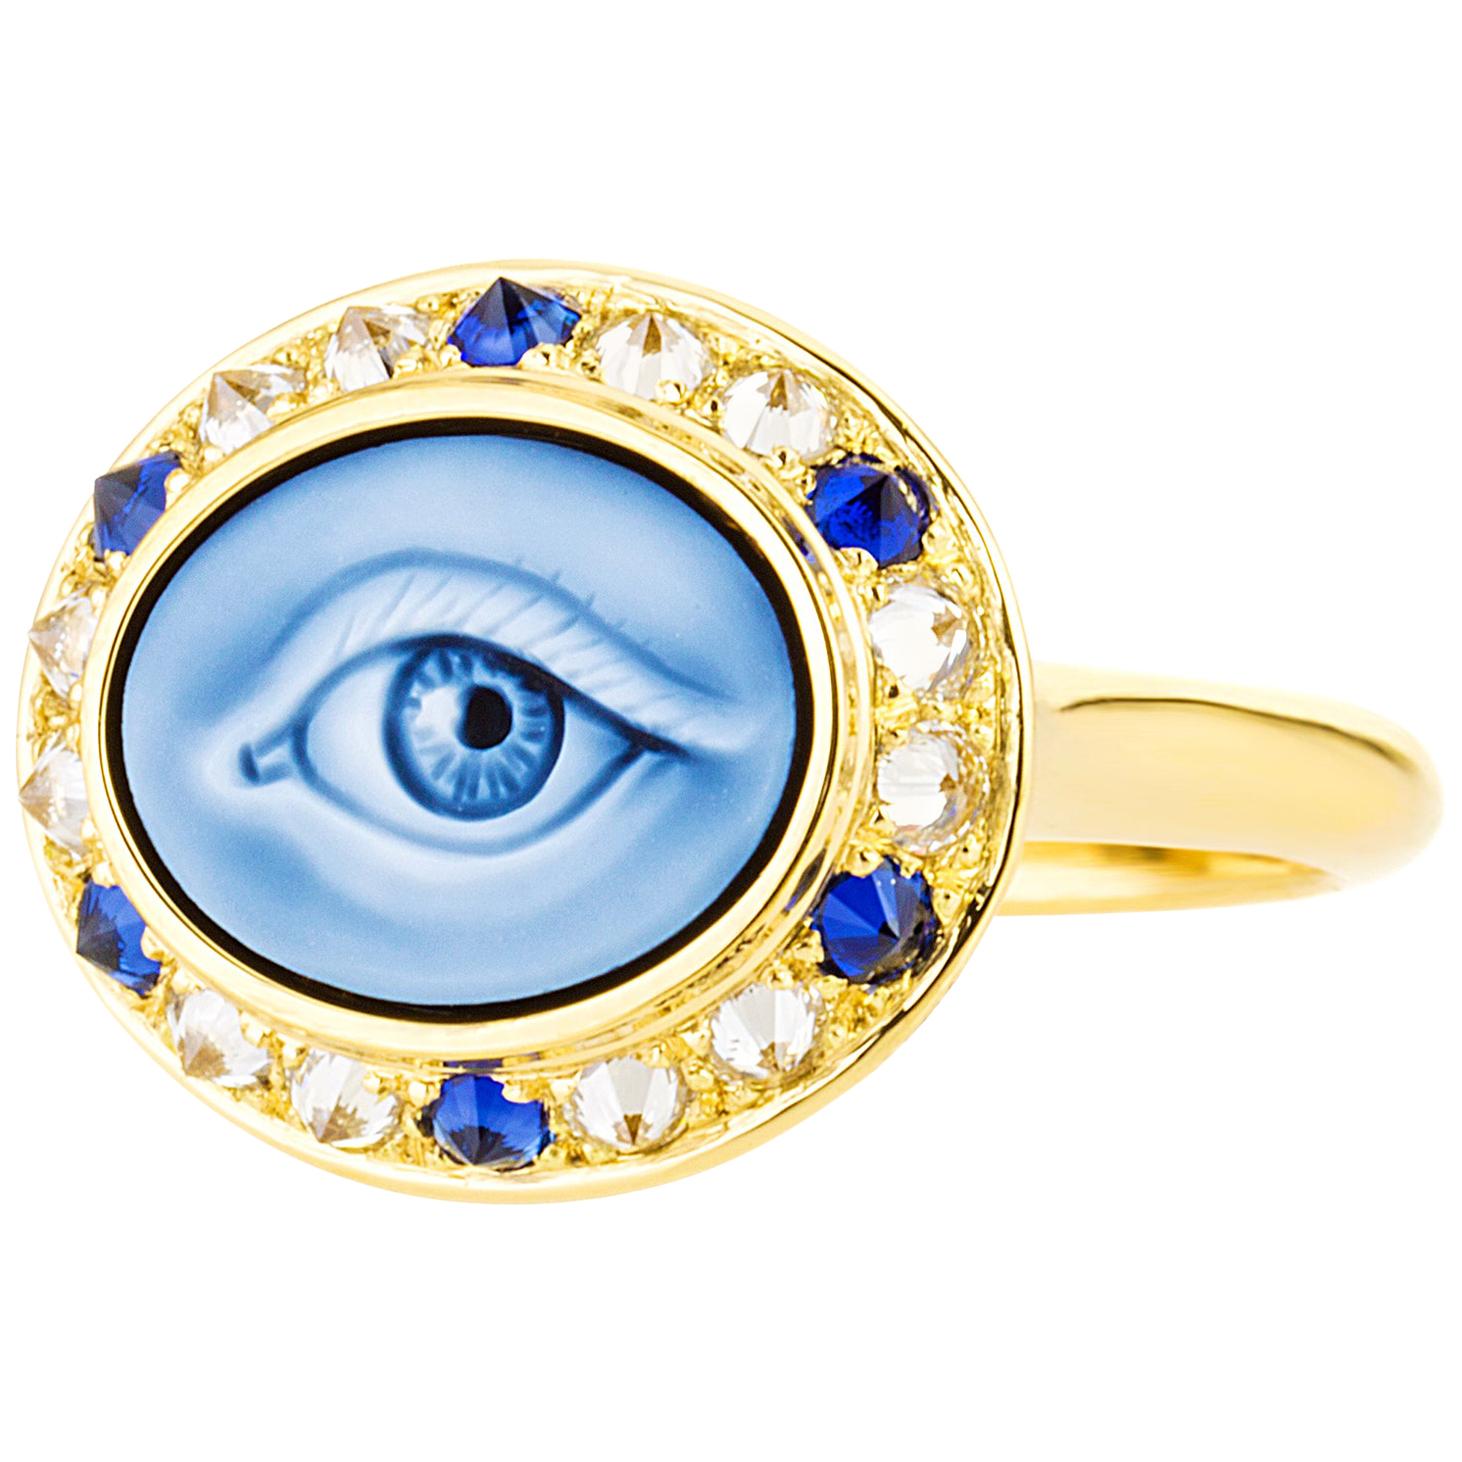  Customizable Carved Agate Cameo, 18k Gold, Diamonds Eye Ring by AnaKatatarina